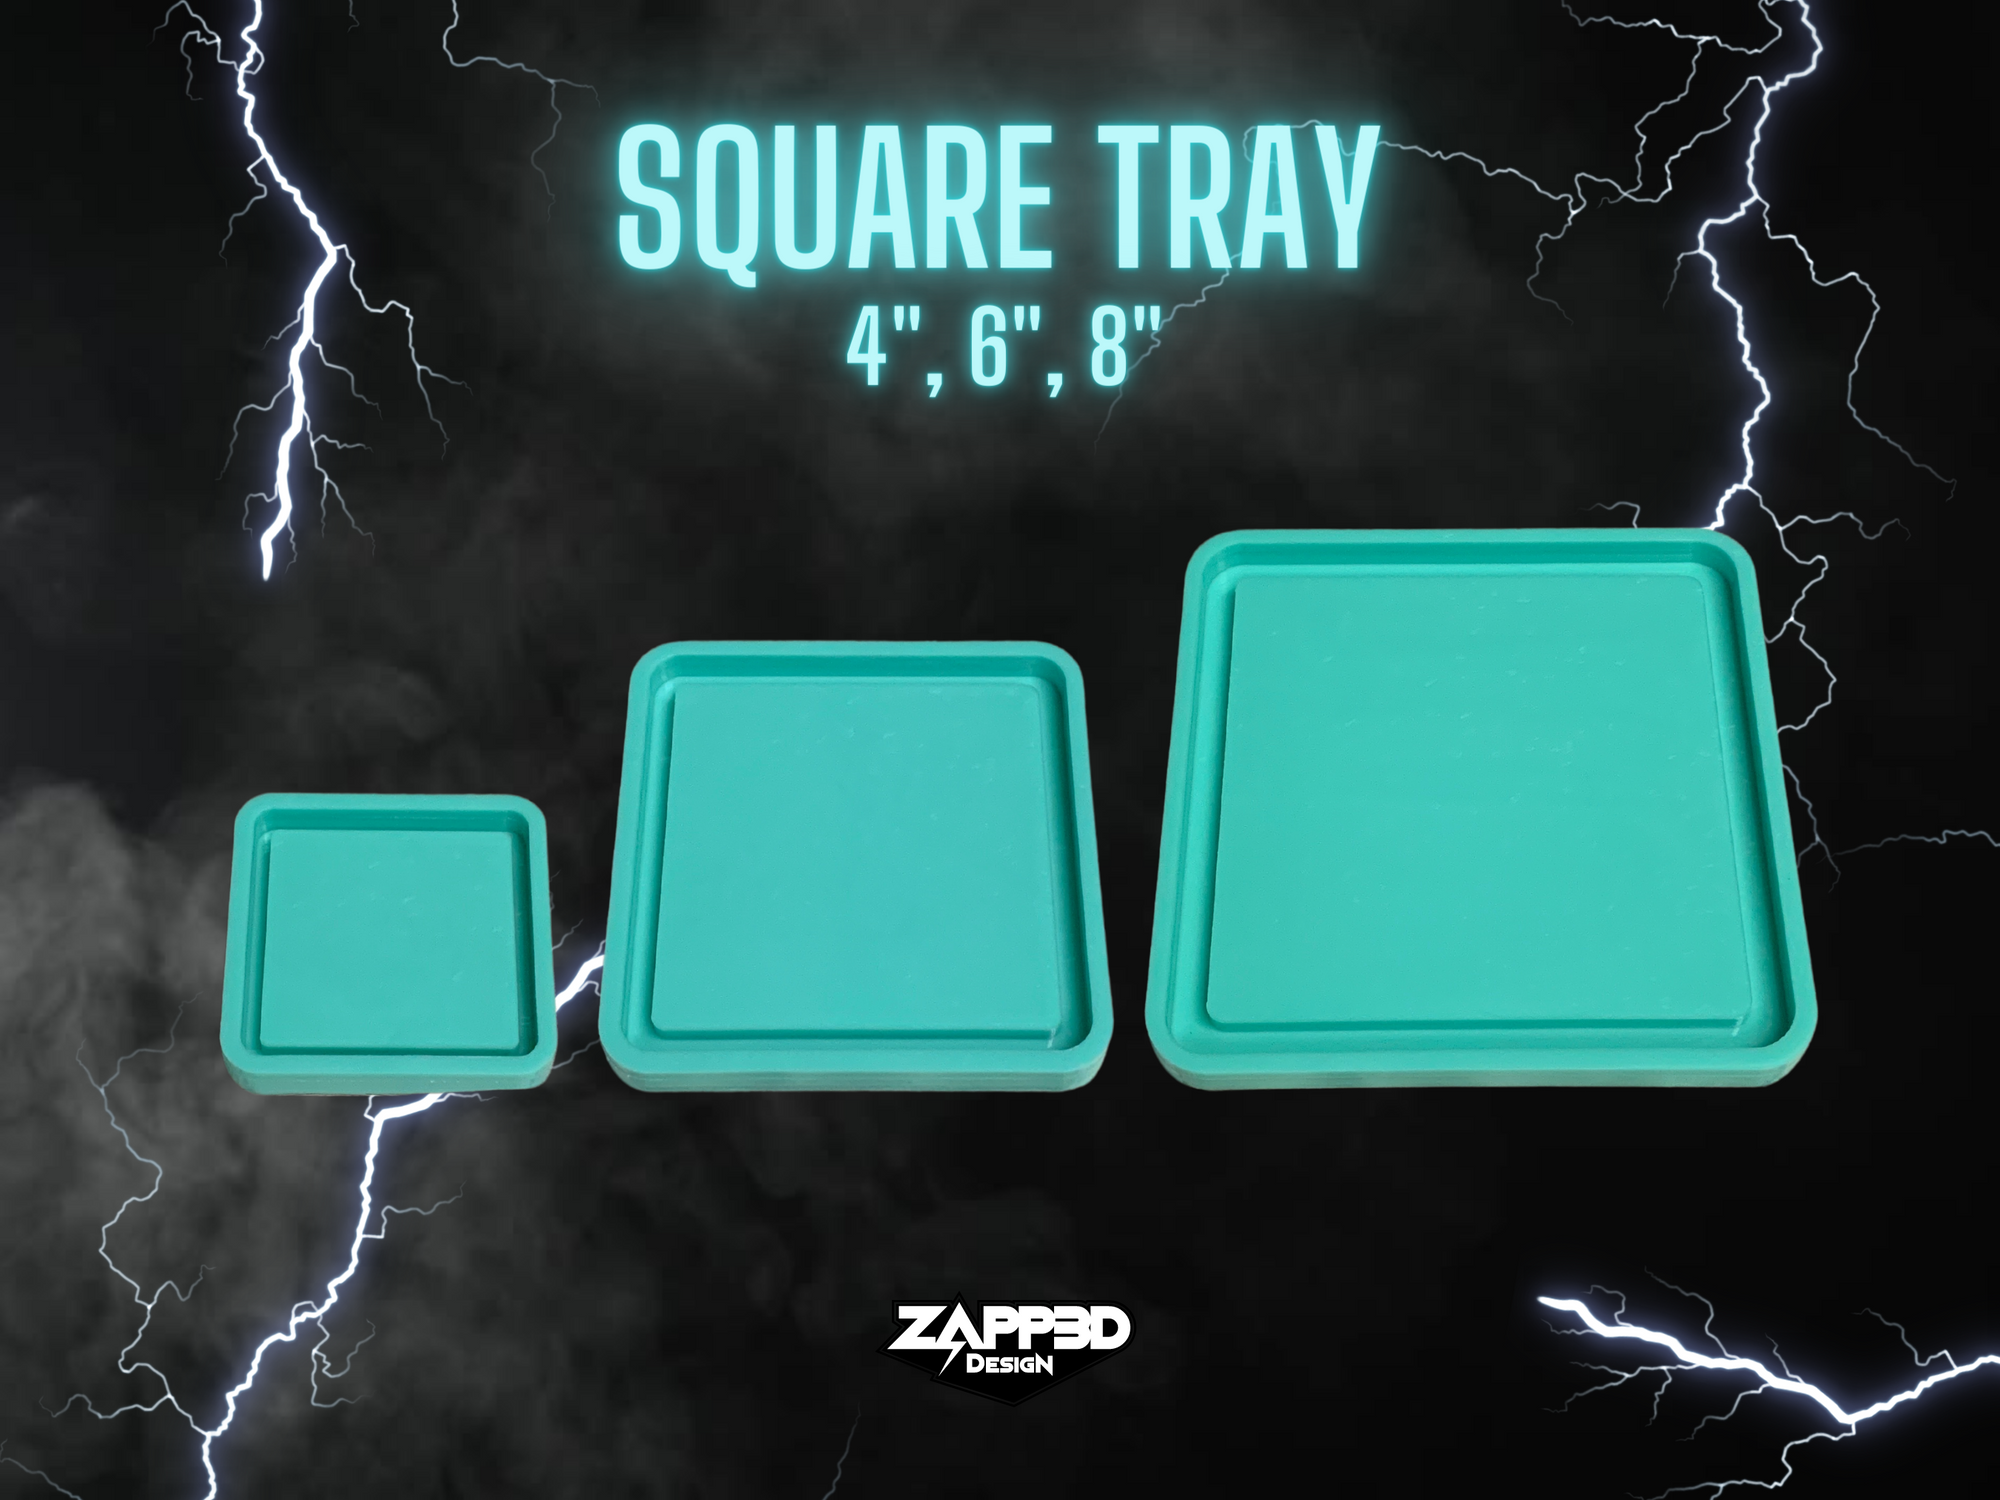 Square Tray Silicone Mold | Sizes - 4", 6", 8" |